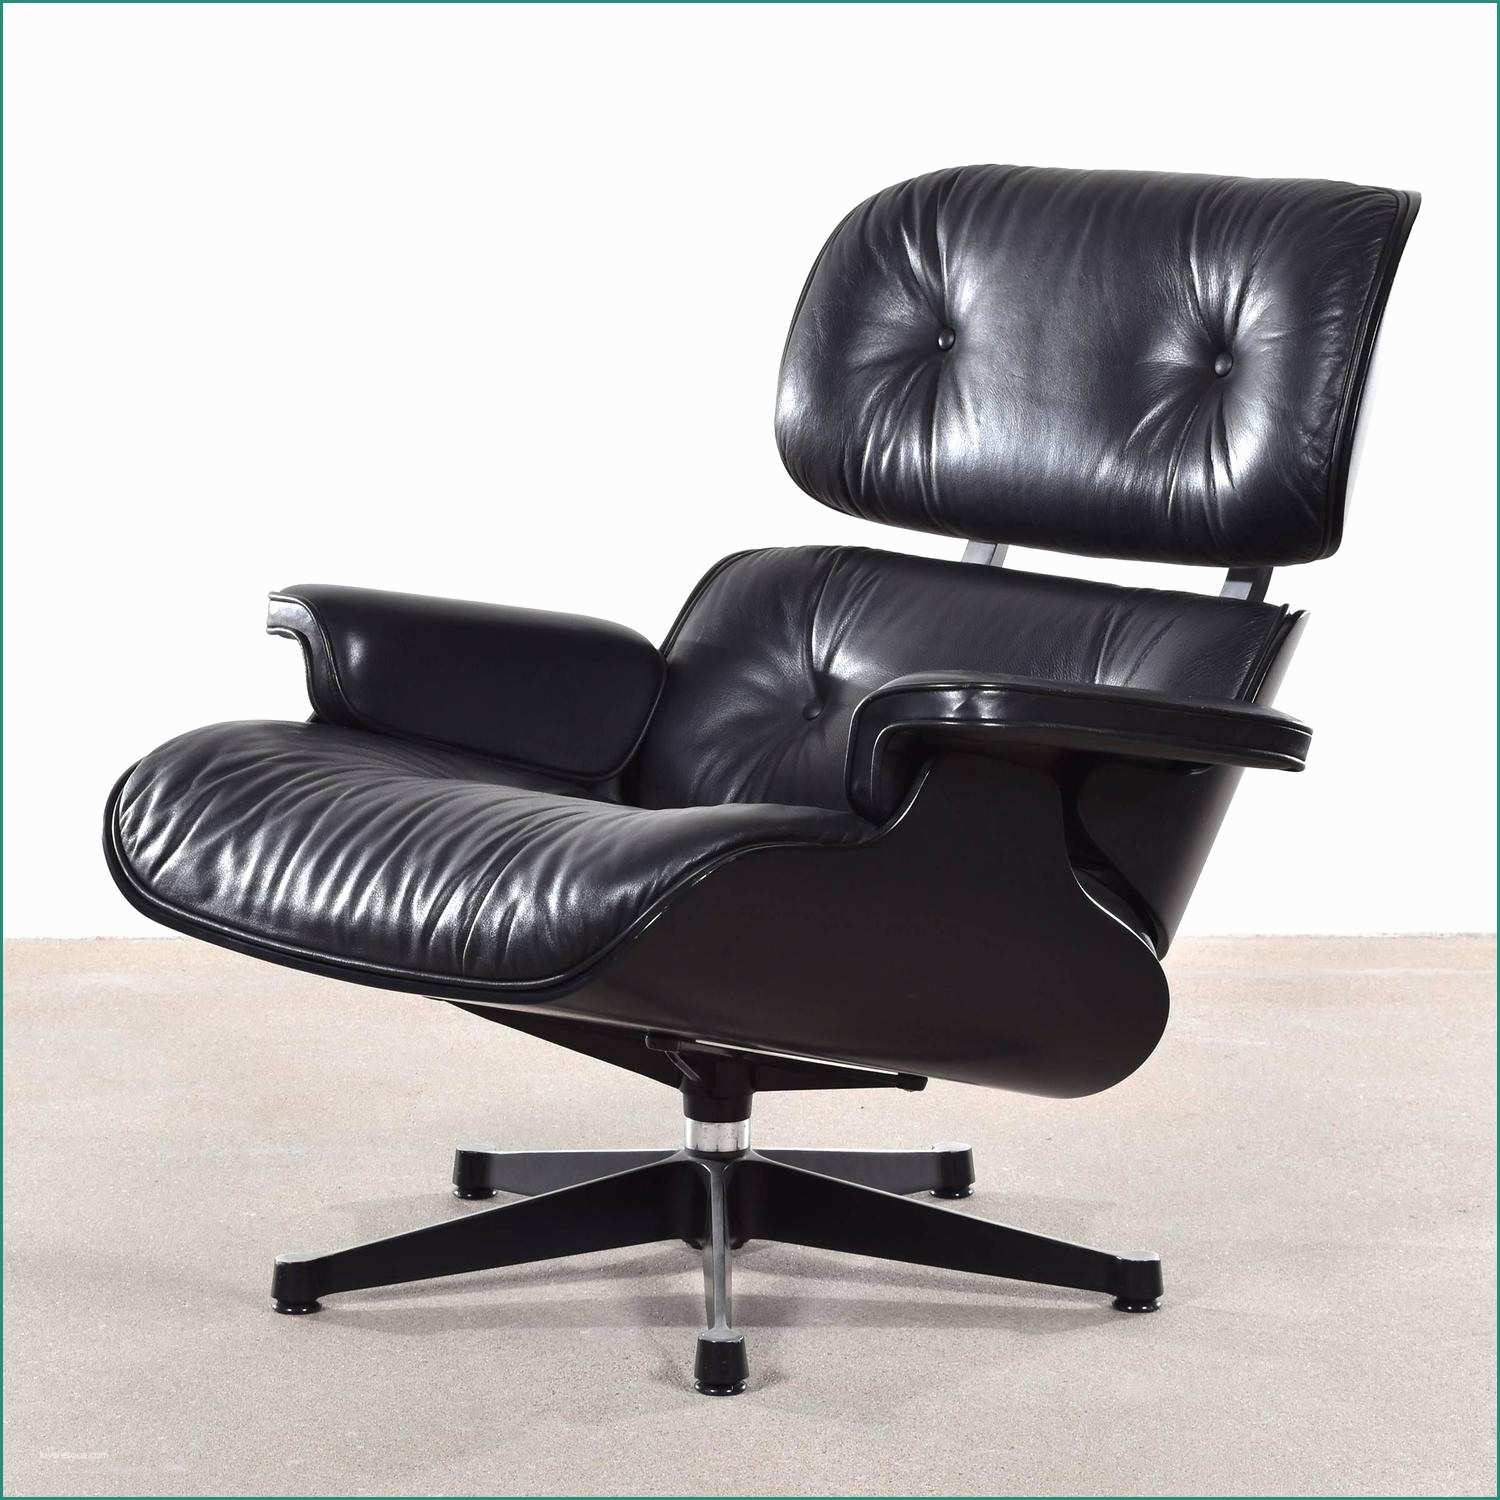 Eames Chair Vitra E Eames Black Lounge Chair for Vitra for Sale at 1stdibs